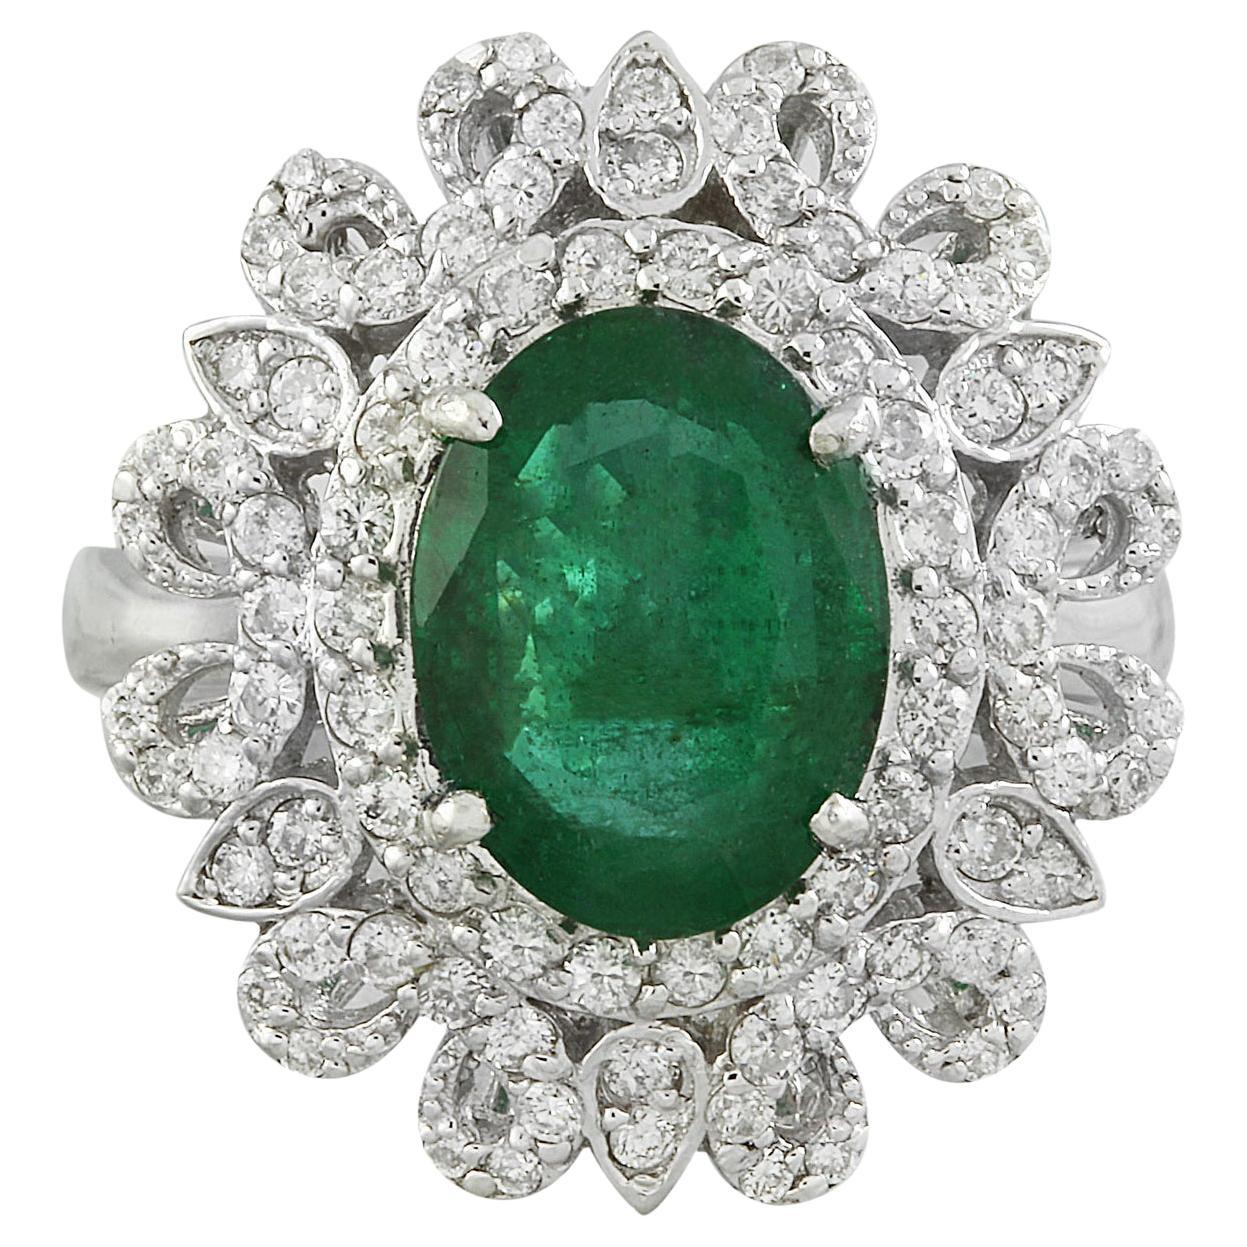 Exquisite Natural Emerald Diamond Ring In 14 Karat Solid White Gold 